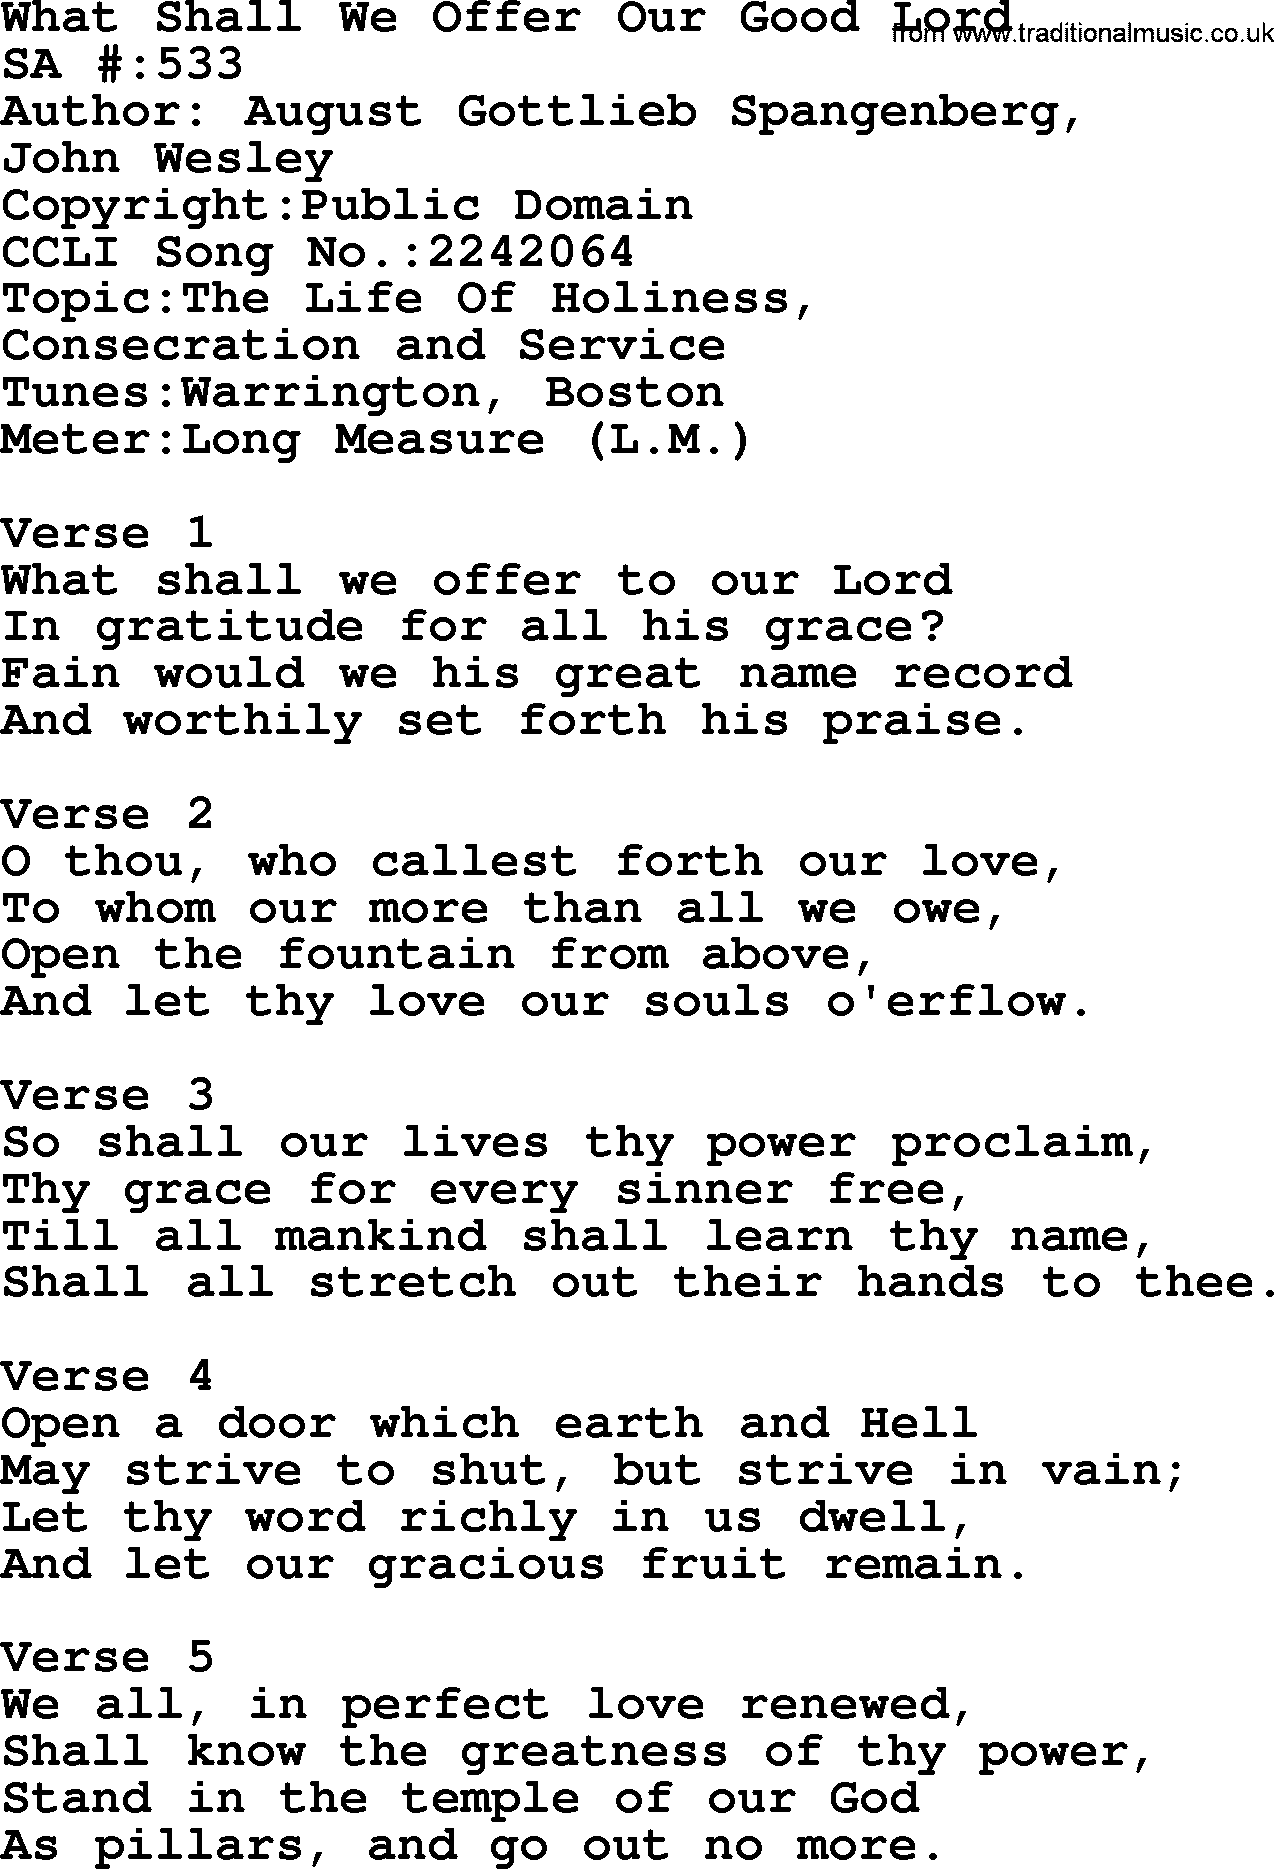 Salvation Army Hymnal, title: What Shall We Offer Our Good Lord, with lyrics and PDF,